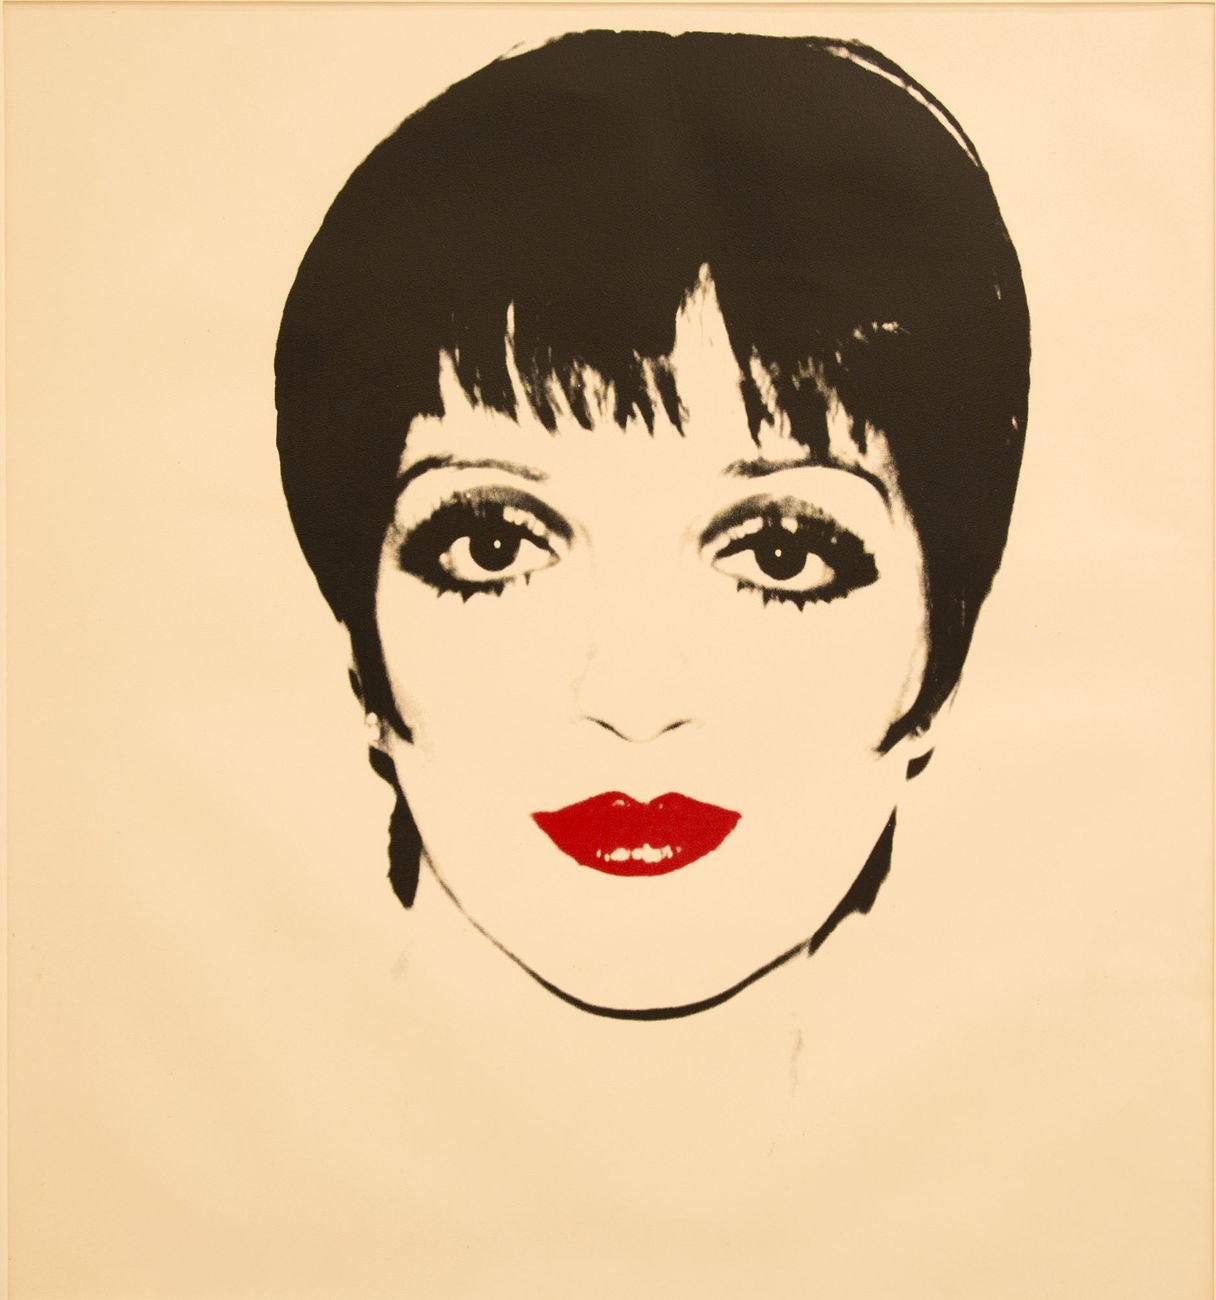 Andy Warhol, Liza Minelli, 1978, screenprint on paper, 121.9x111.7 cm. Courtesy The Andy Warhol Art Works Foundation for the Visual Arts